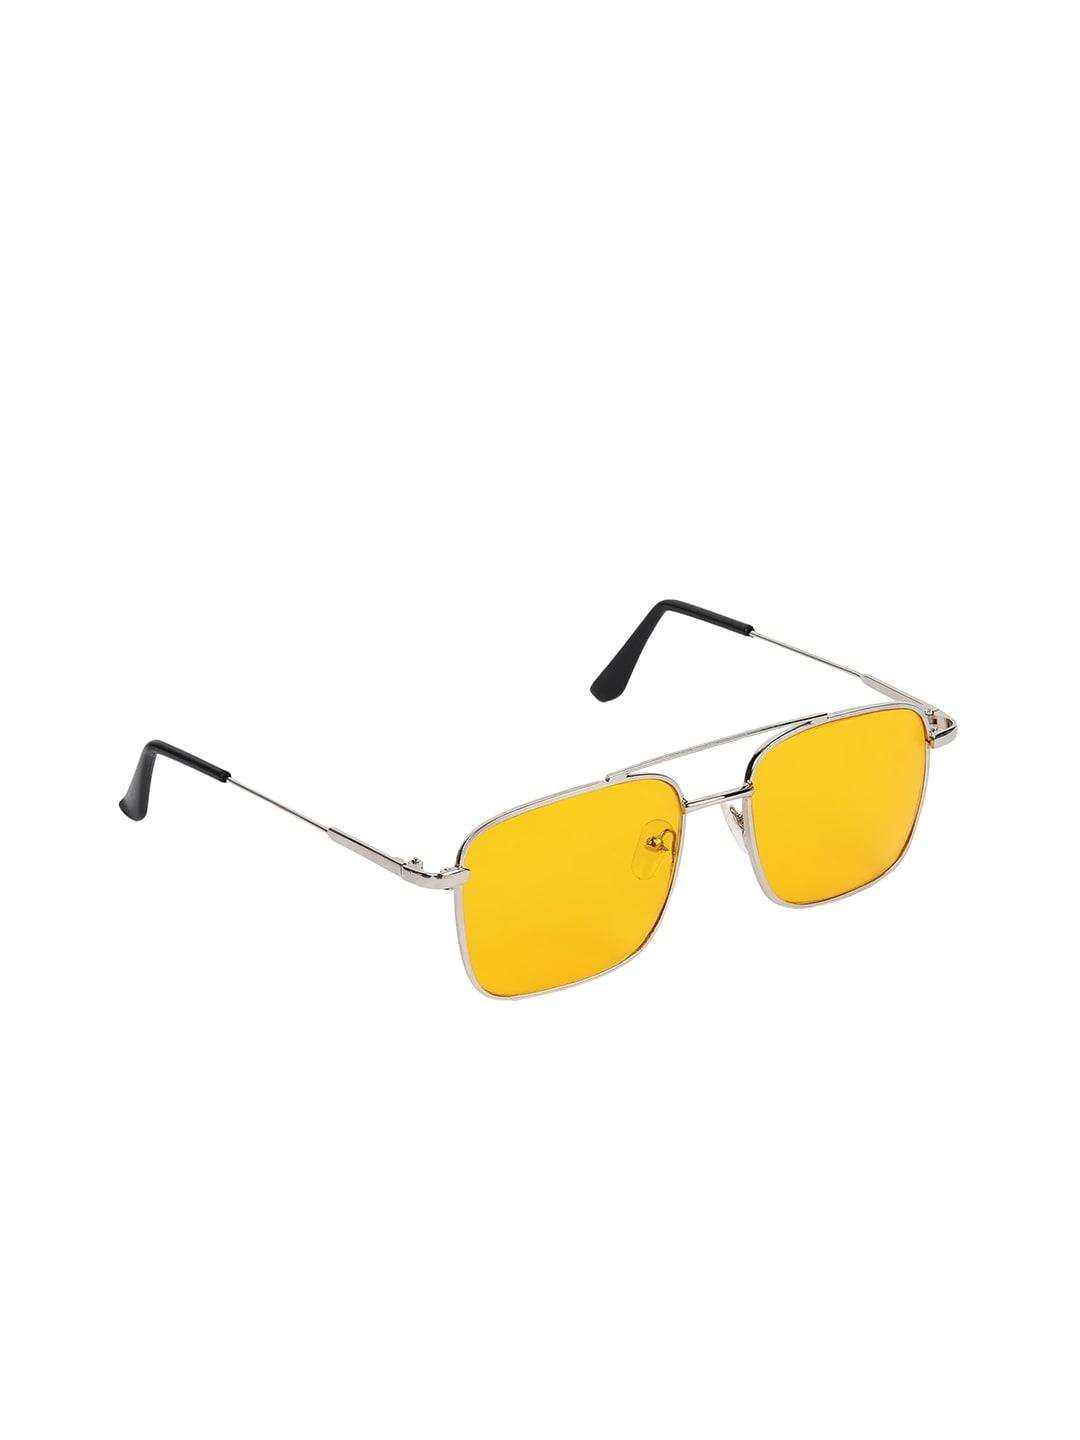 garth unisex yellow lens & silver-toned square sunglasses with uv protected lens